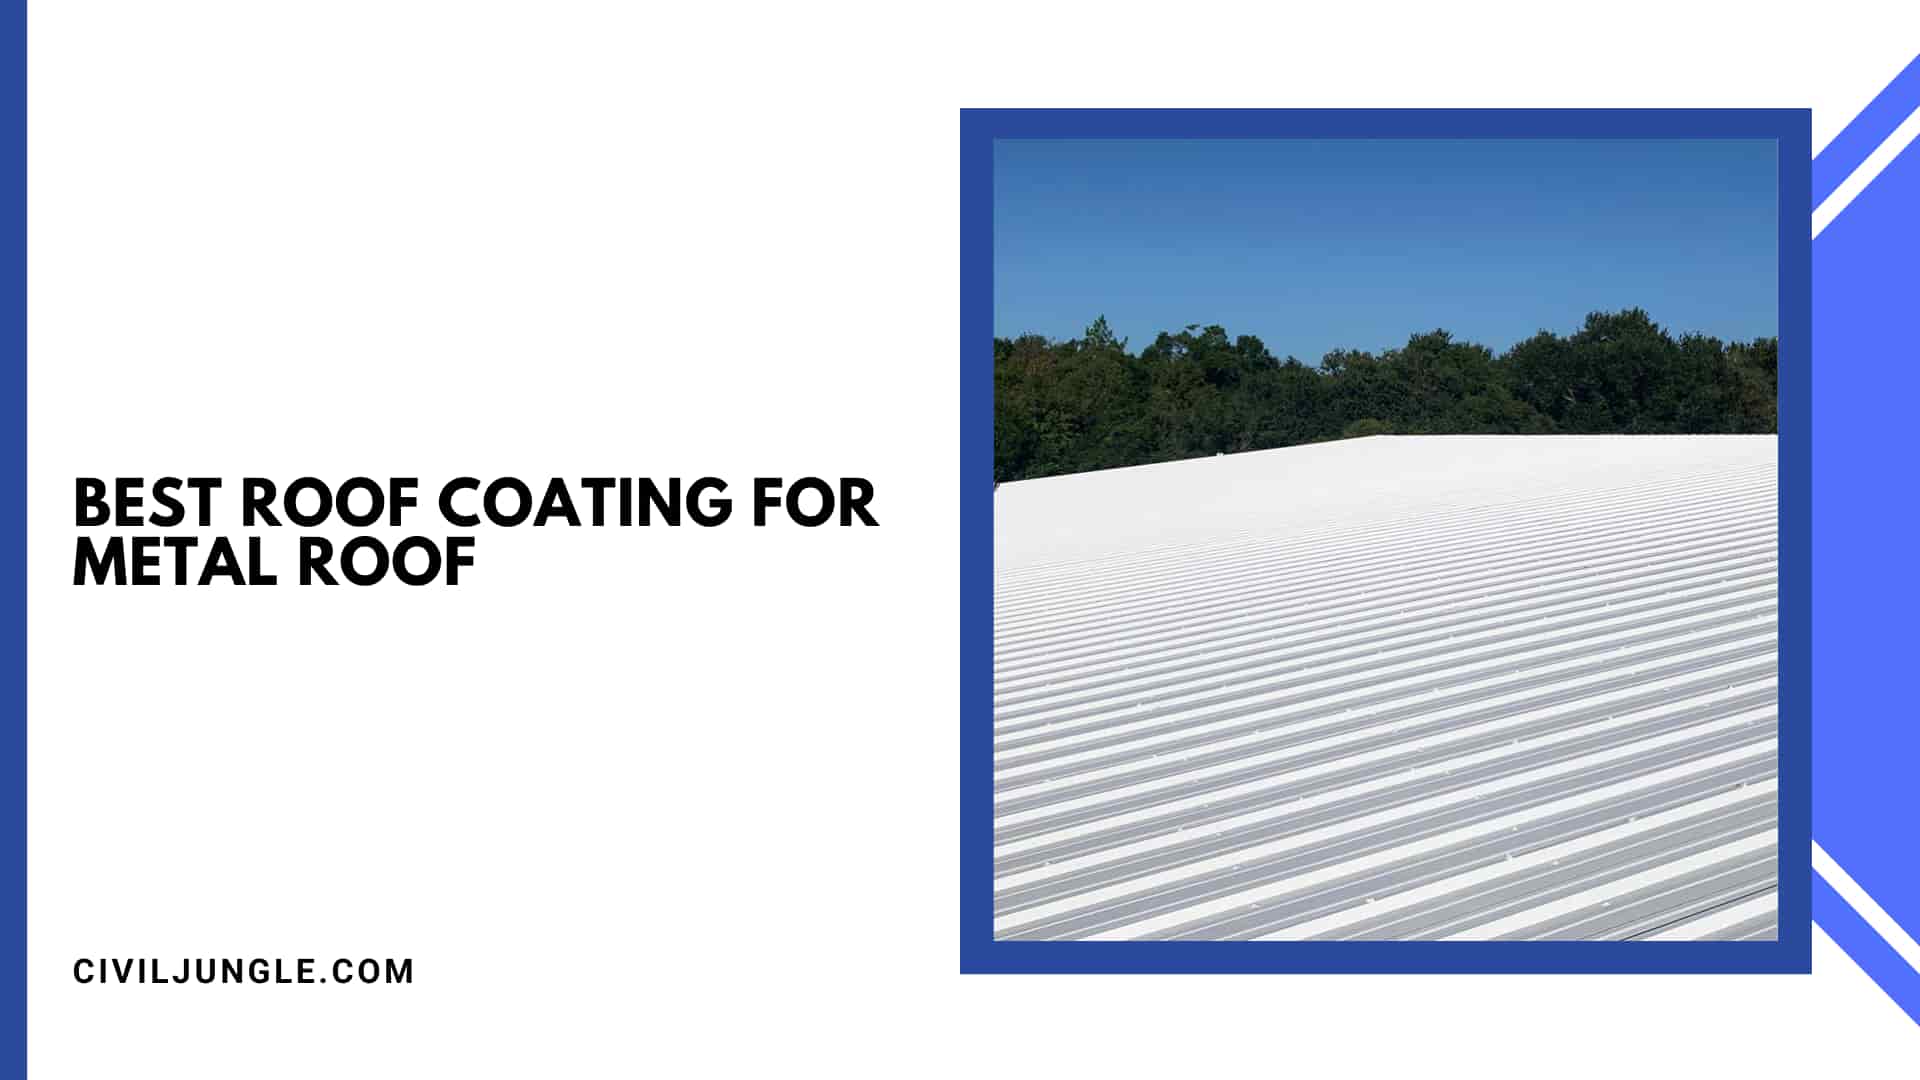 Best Roof Coating for Metal Roof